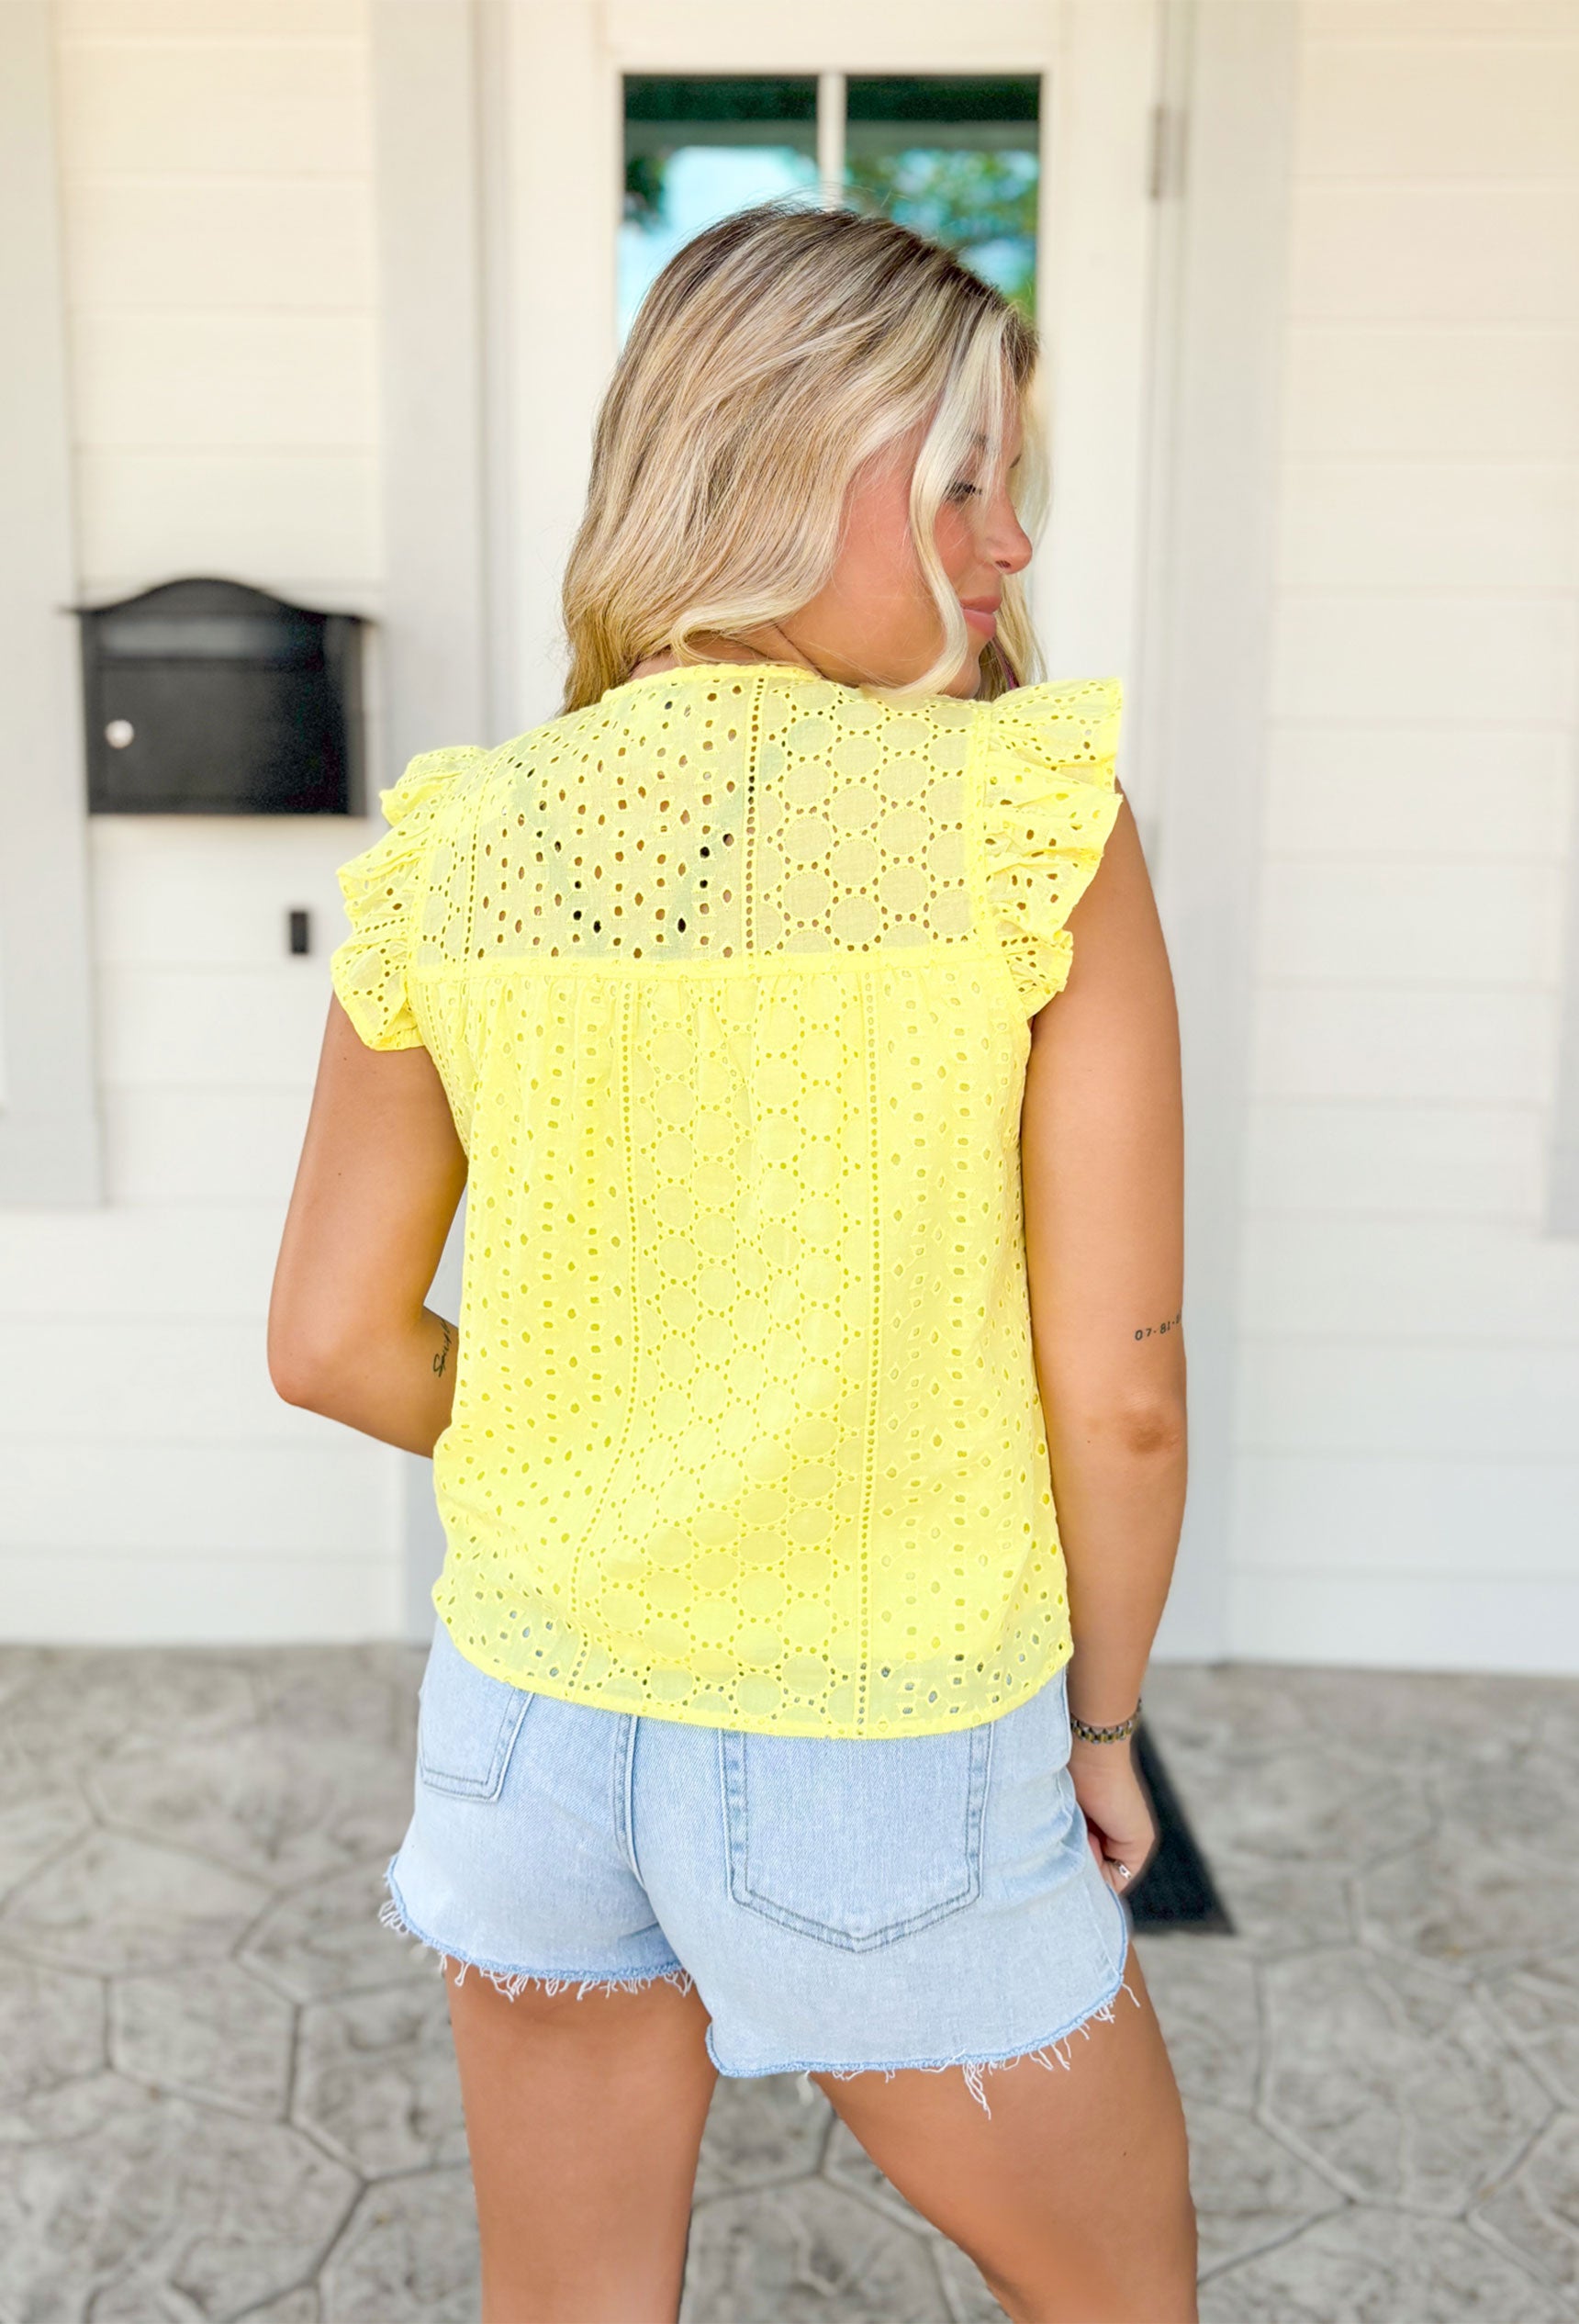 Full Of Sunshine Top, baby yellow lace overlay tank top, button down, ruffle sleeves